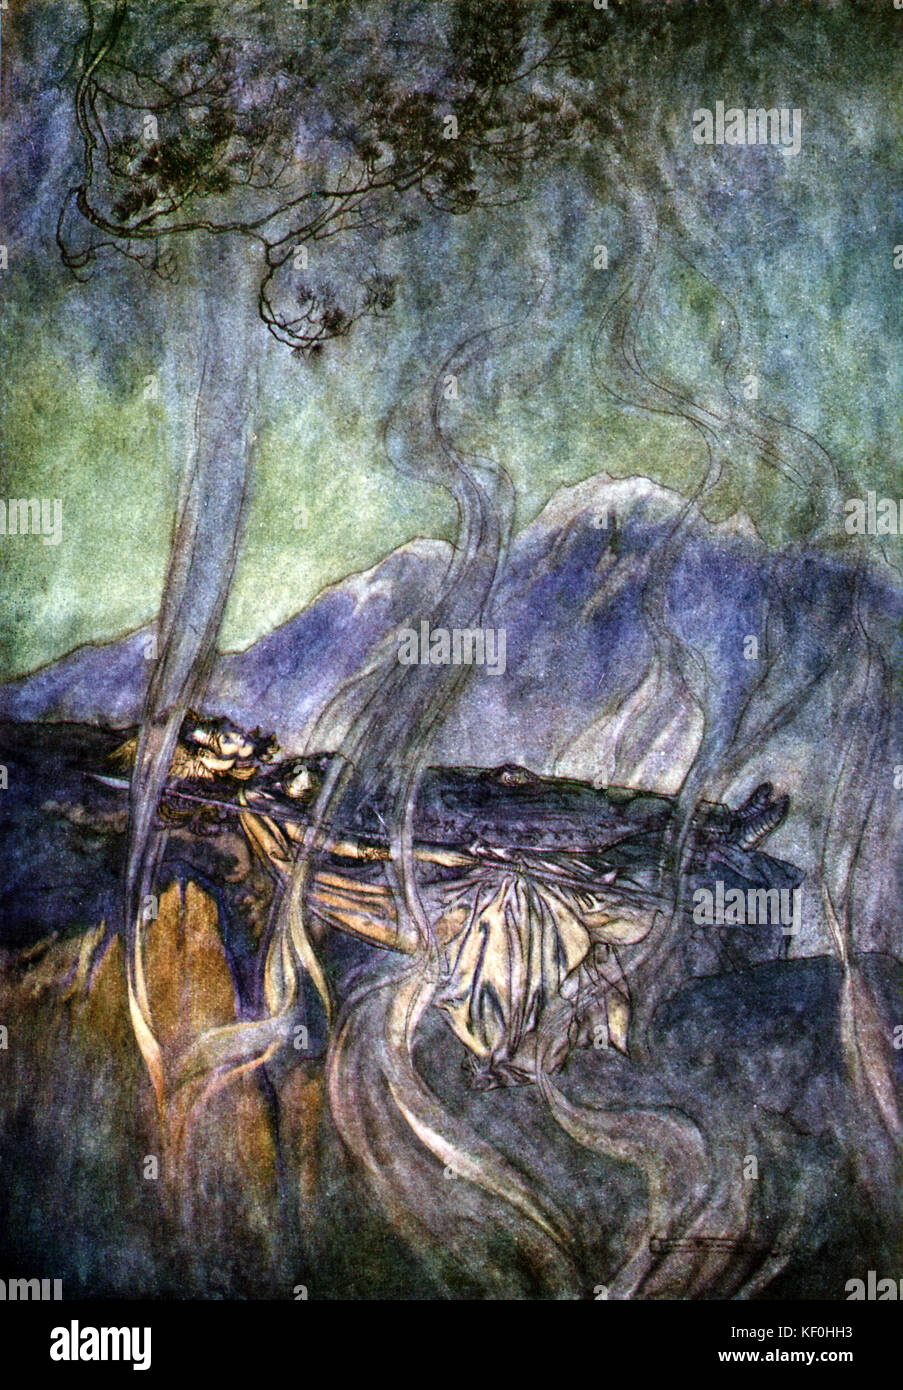 The Valkyrie / Die Walküre by Richard Wagner. Brünnhilde 's is laid to her enchanted sleep by Wotan, king of the West Germanic pantheon of gods.  Illustration by Arthur Rackham 1867 - 1939.  Caption:  'The sleep of Brünnhilde' Act 3.  From 'The Ring Cycle' / 'Der Ring des Nibelungen'.  RW German composer & author, 22 May 1813 - 13 February 1883. Stock Photo